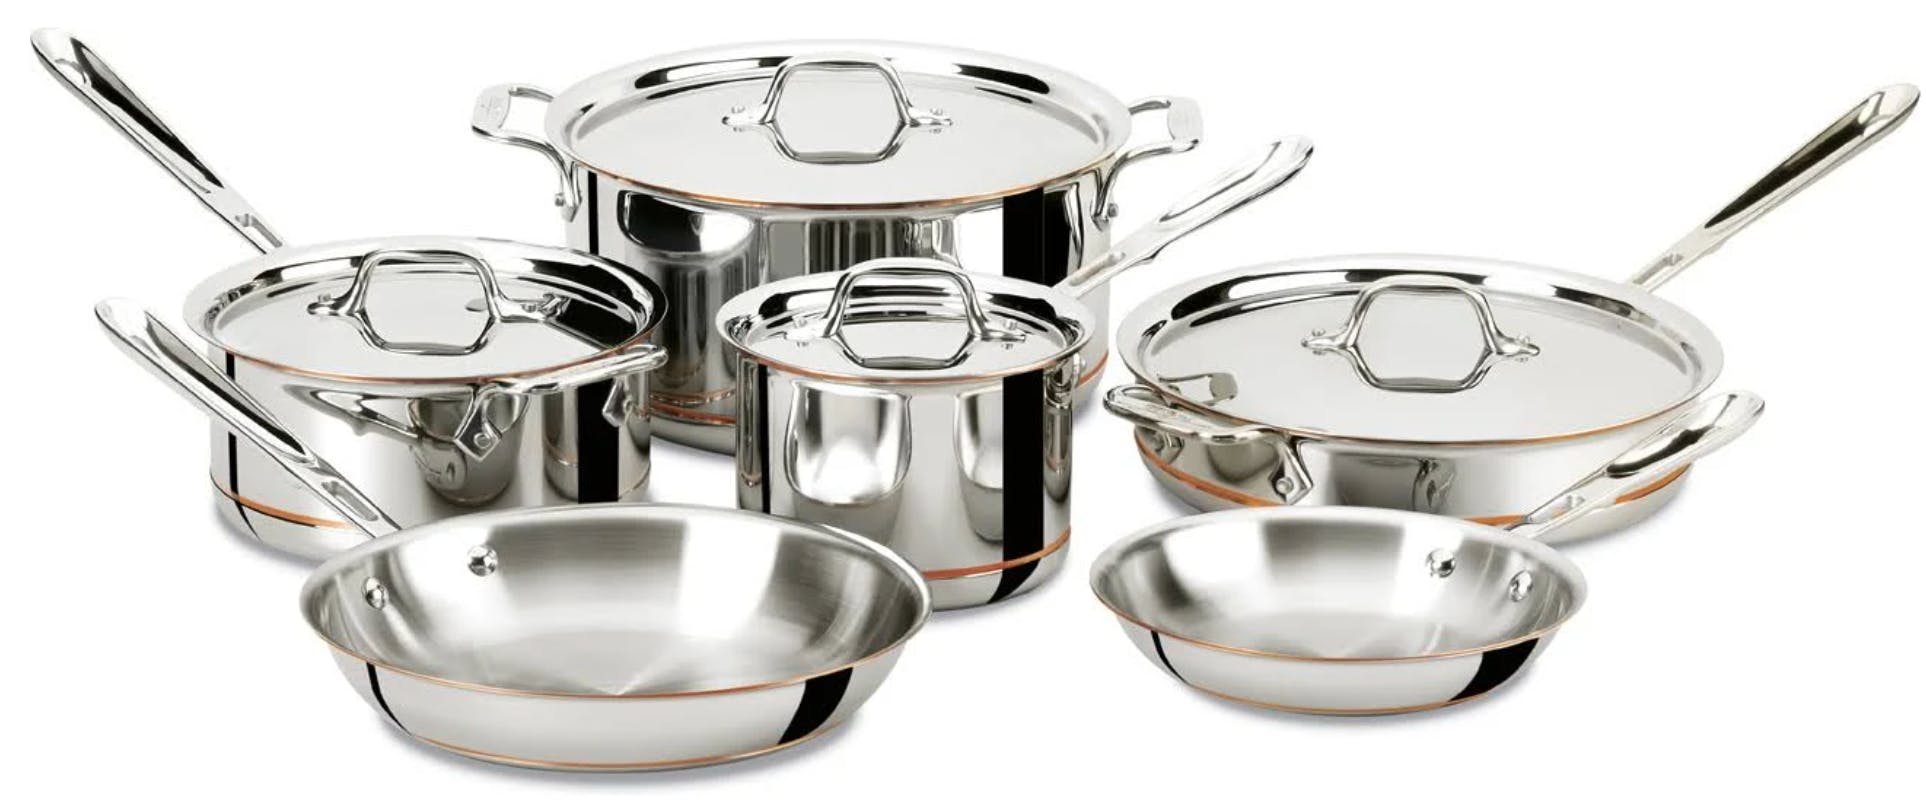 The All-Clad Copper Core Cookware Set.